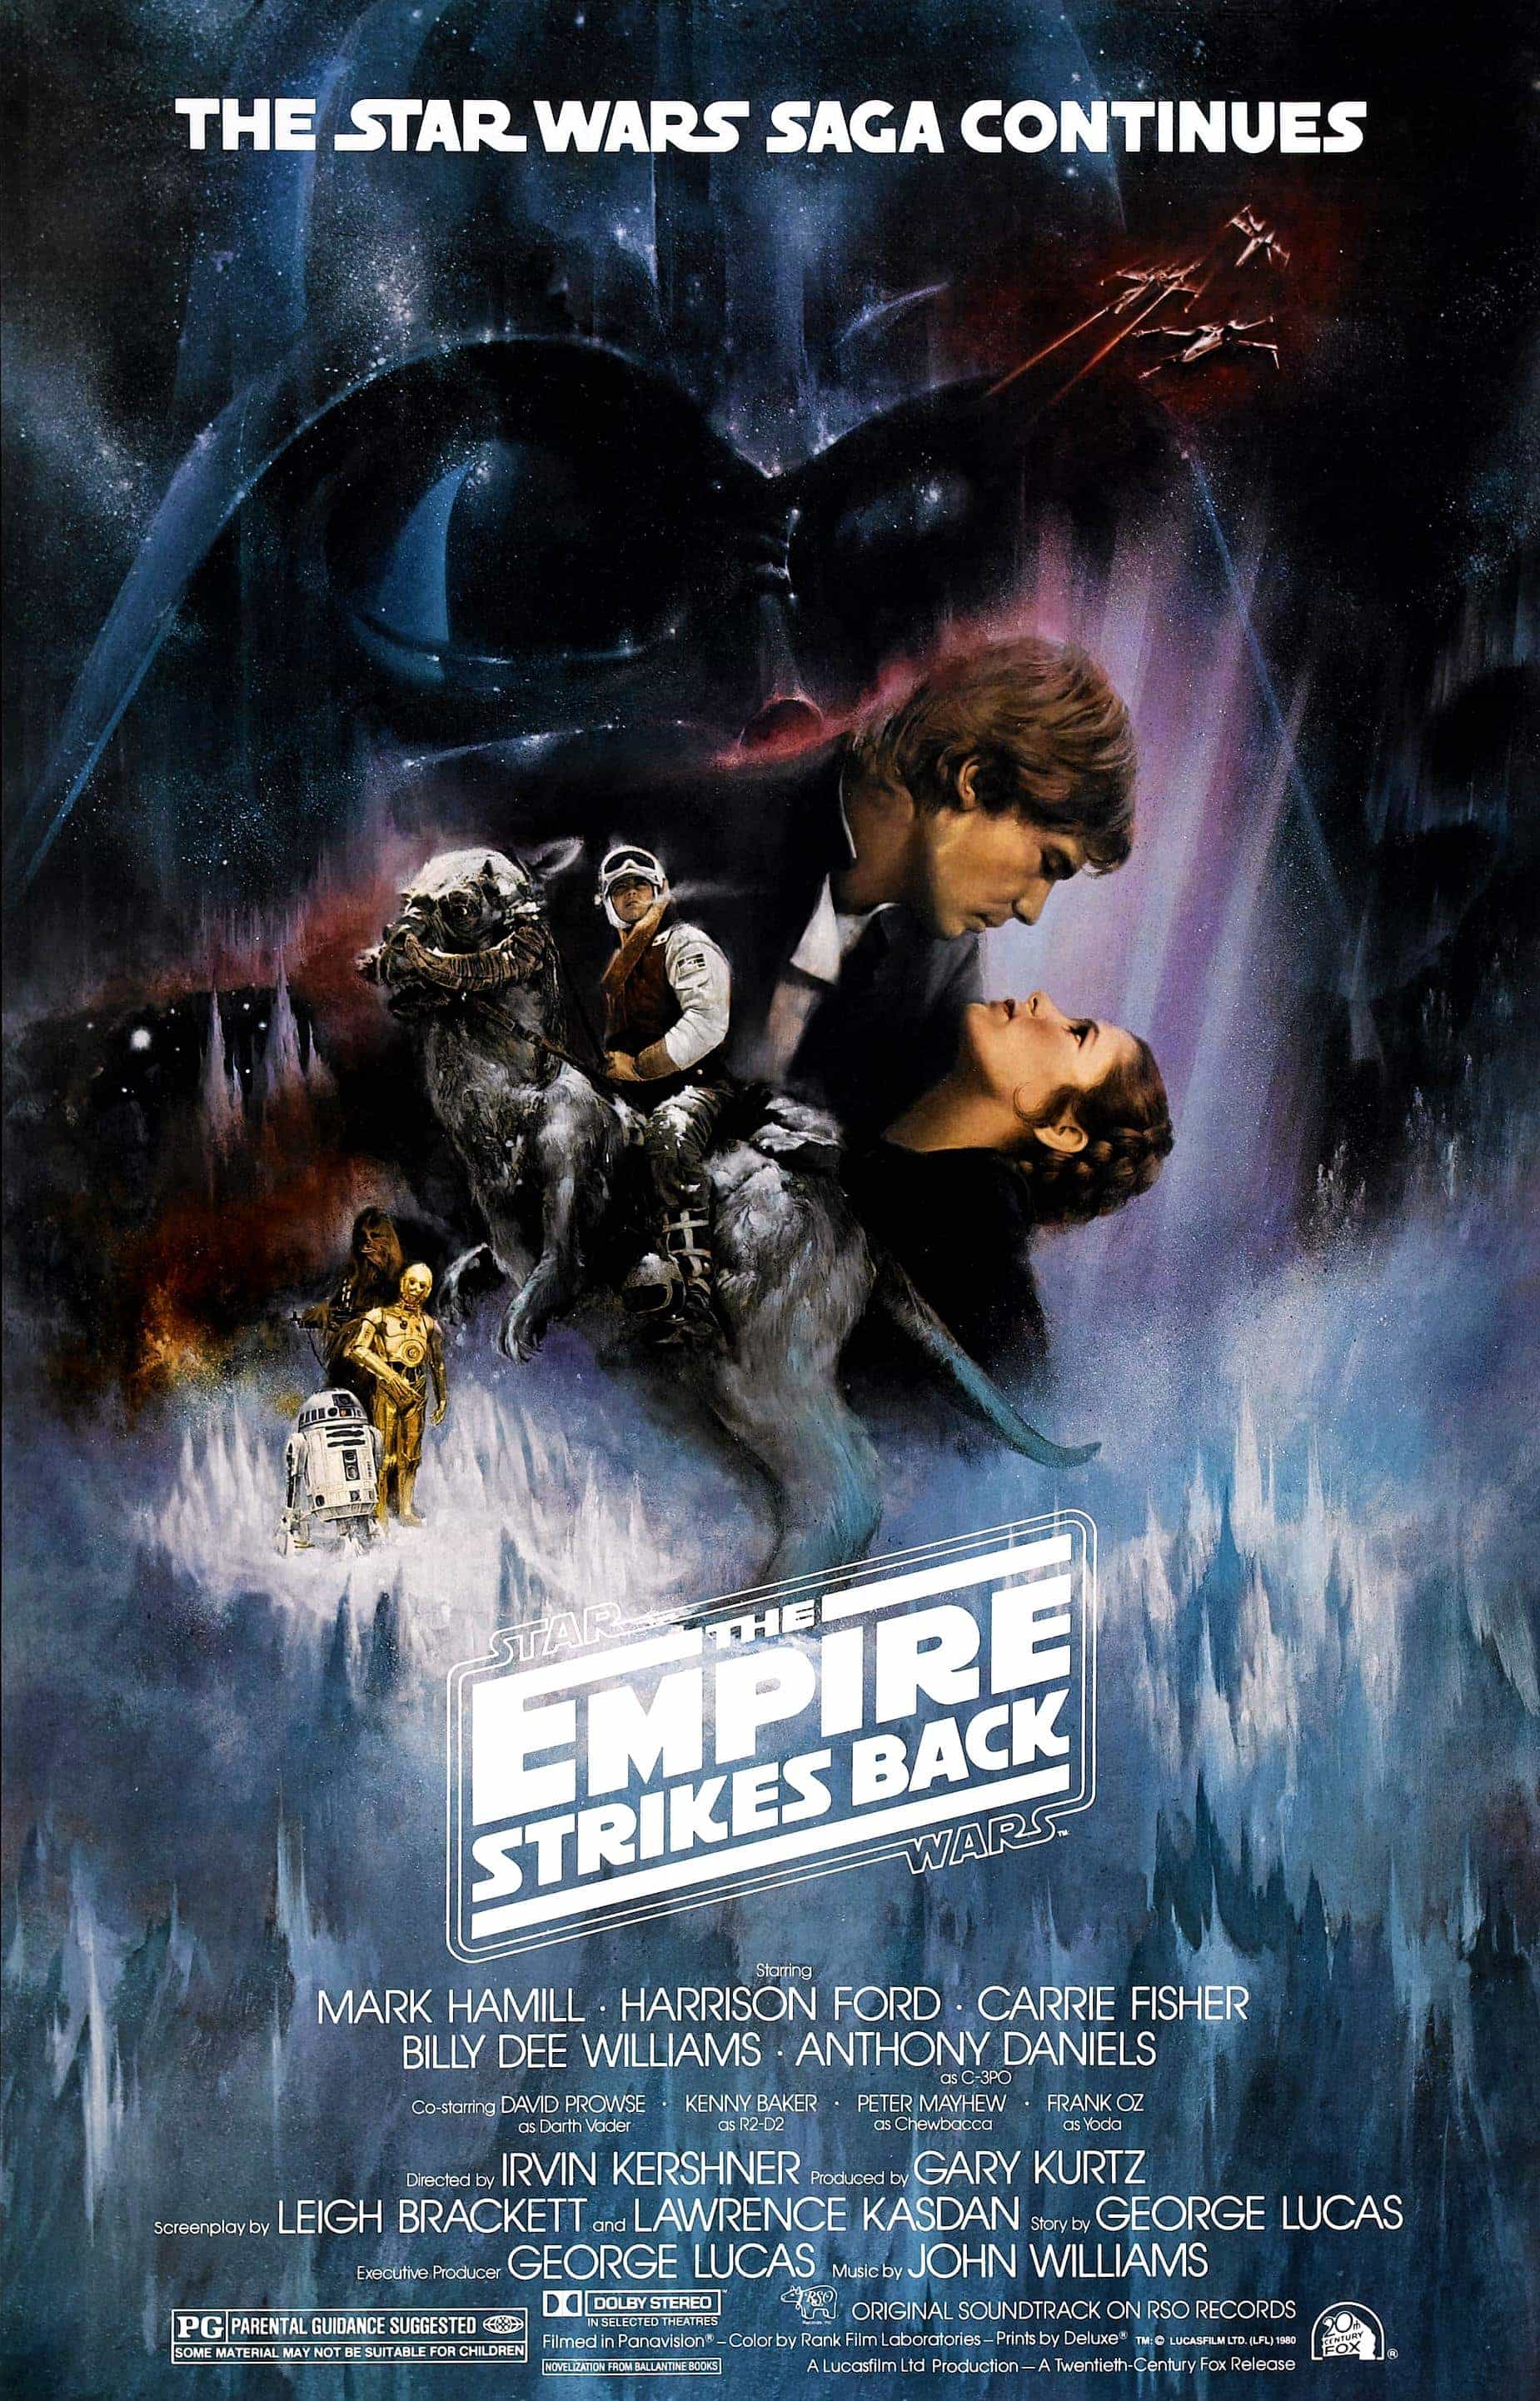 30 years since first Empire Strikes Back glimpse
